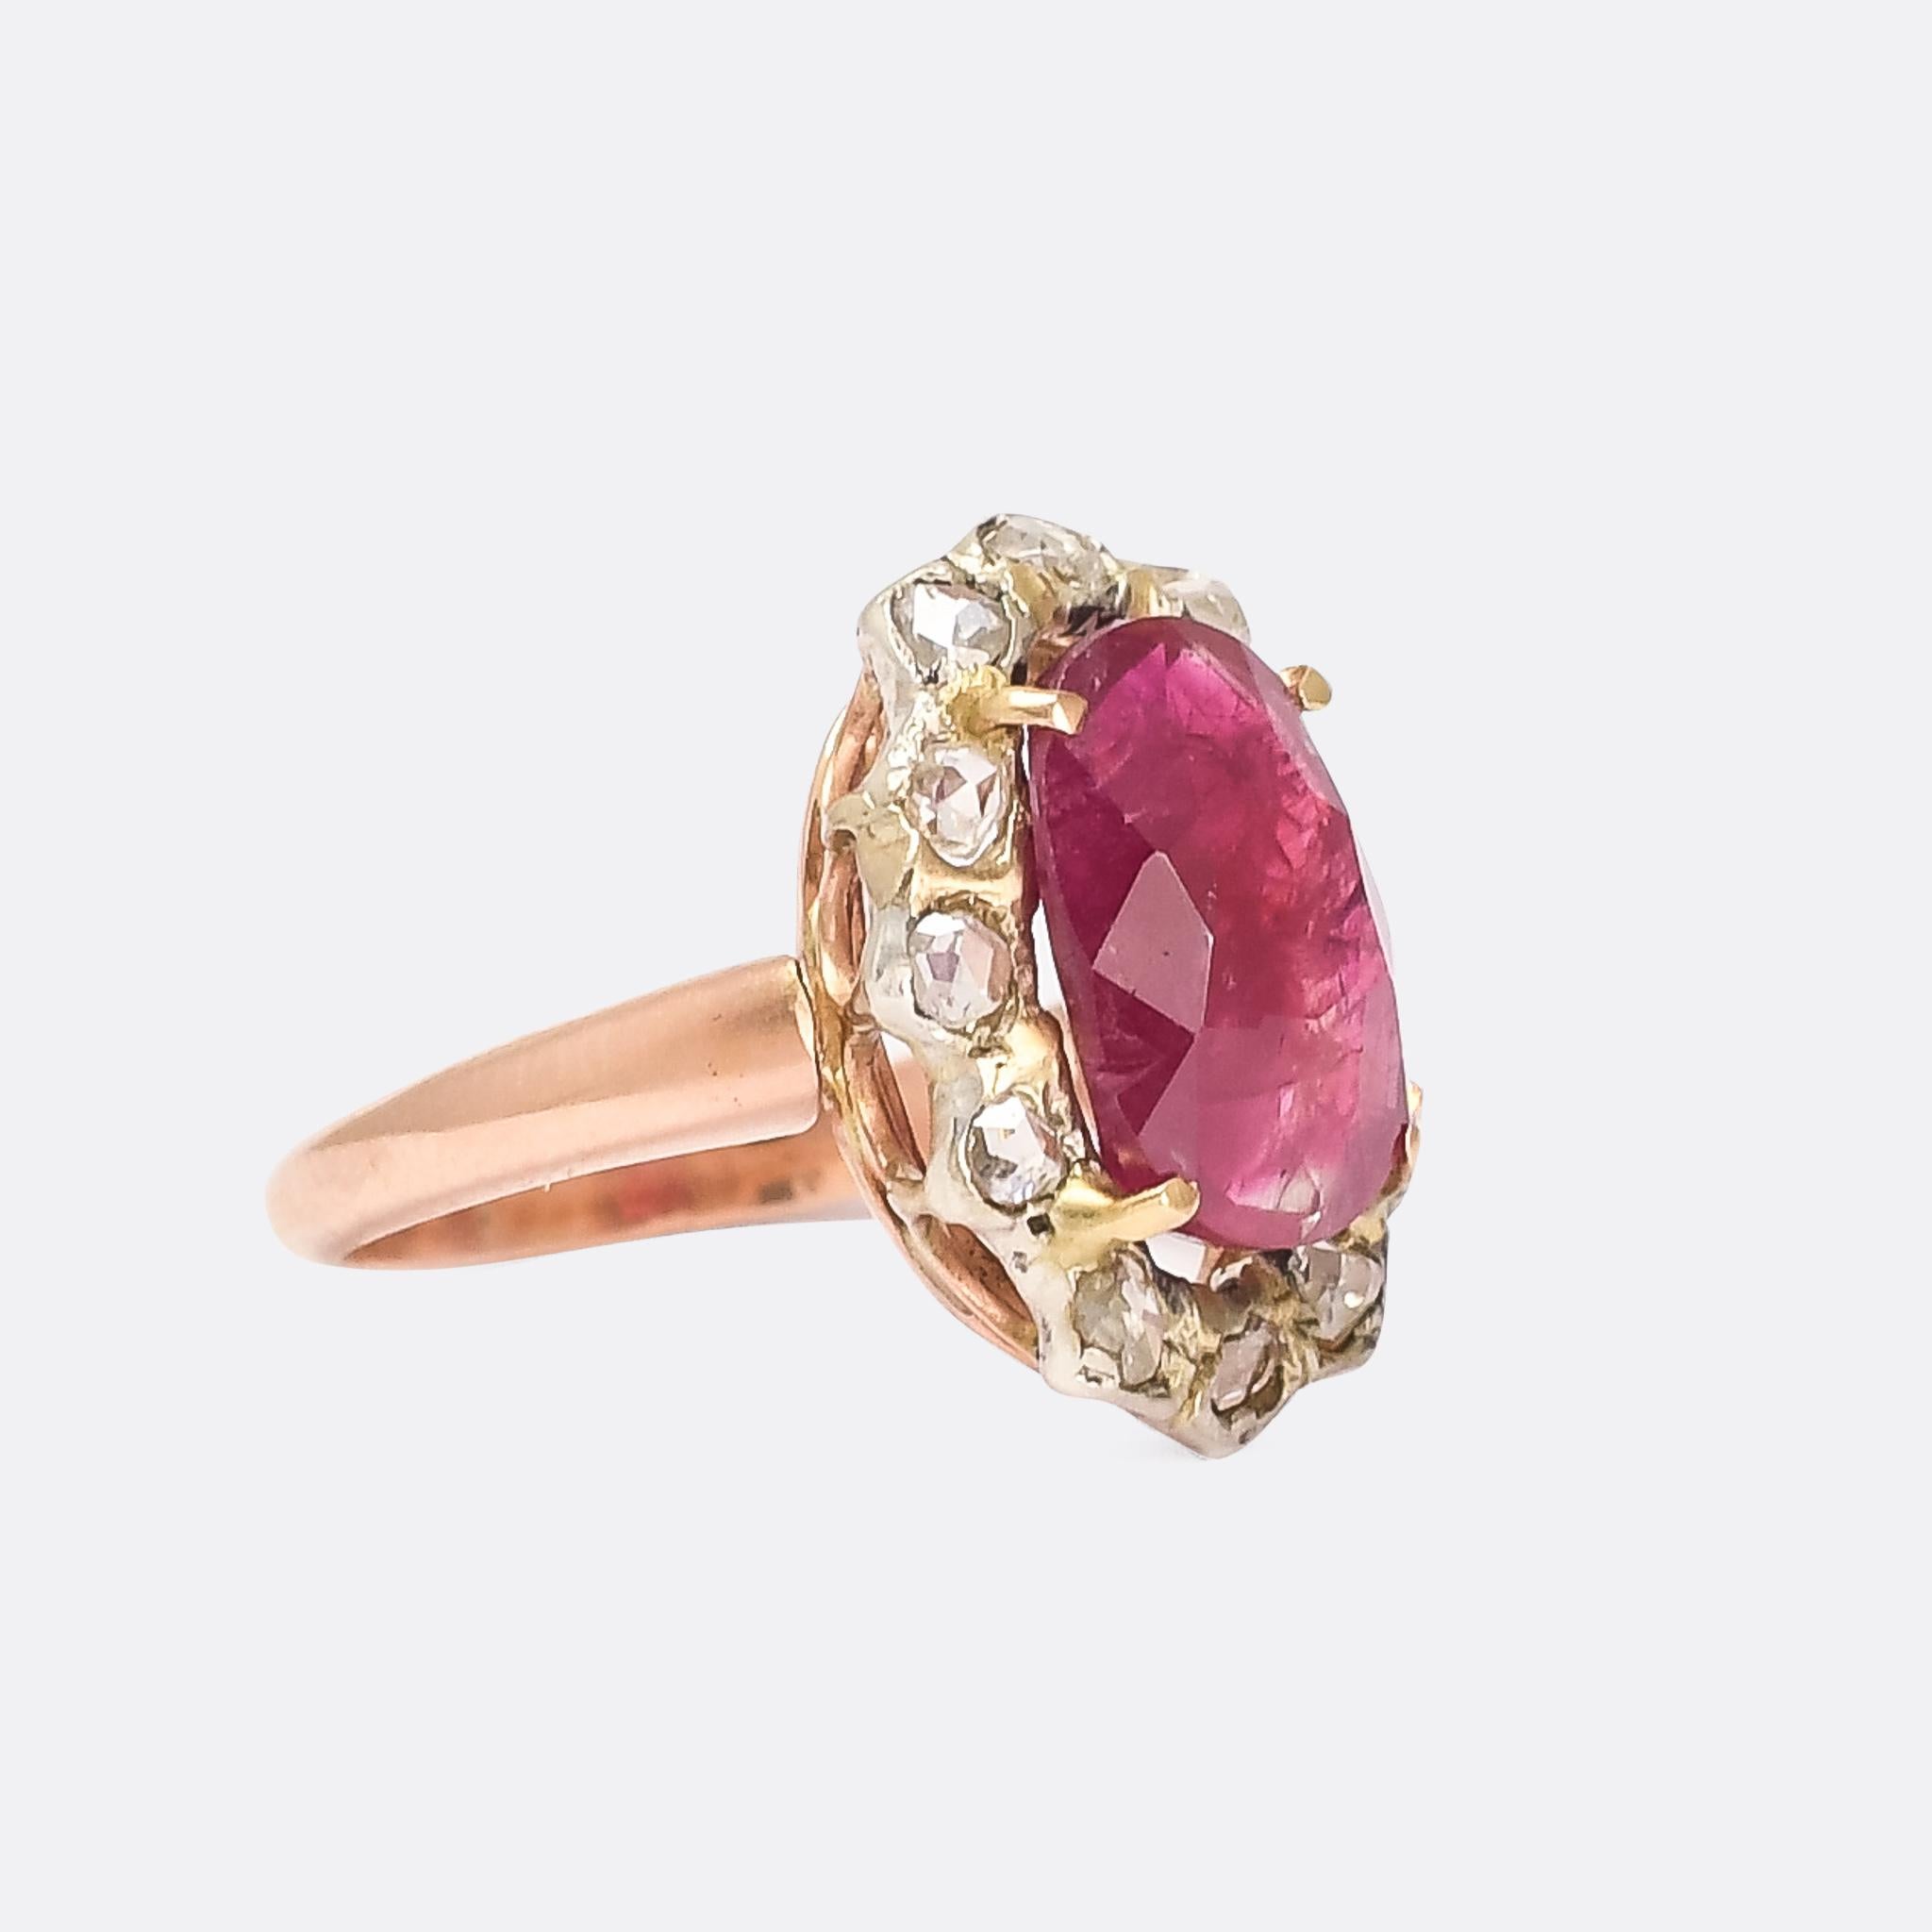 A superb antique Burma ruby and diamond cluster ring dating from the late Victorian period. It's set with a stunning 4.98 carat natural Burmese ruby, certified with no indication of heat treatment. The principal stone is surrounded by a halo of rose